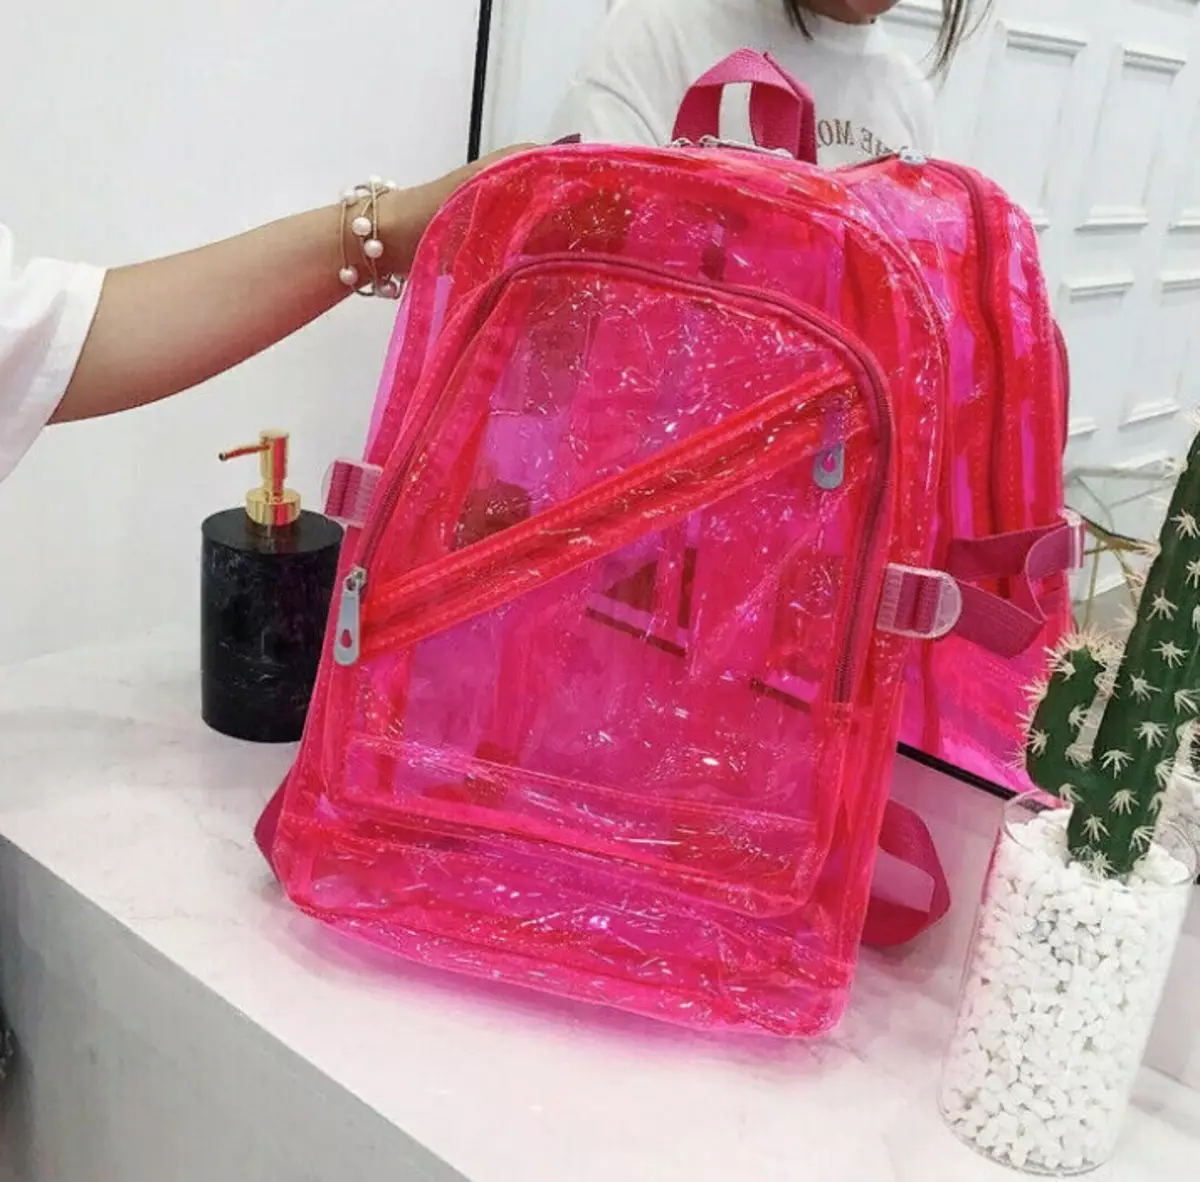 Transparent Backpacks: Little Women's Pink Translucent Models and Mini Backpacks with Sequins, White and Other Backpacks 15362_28